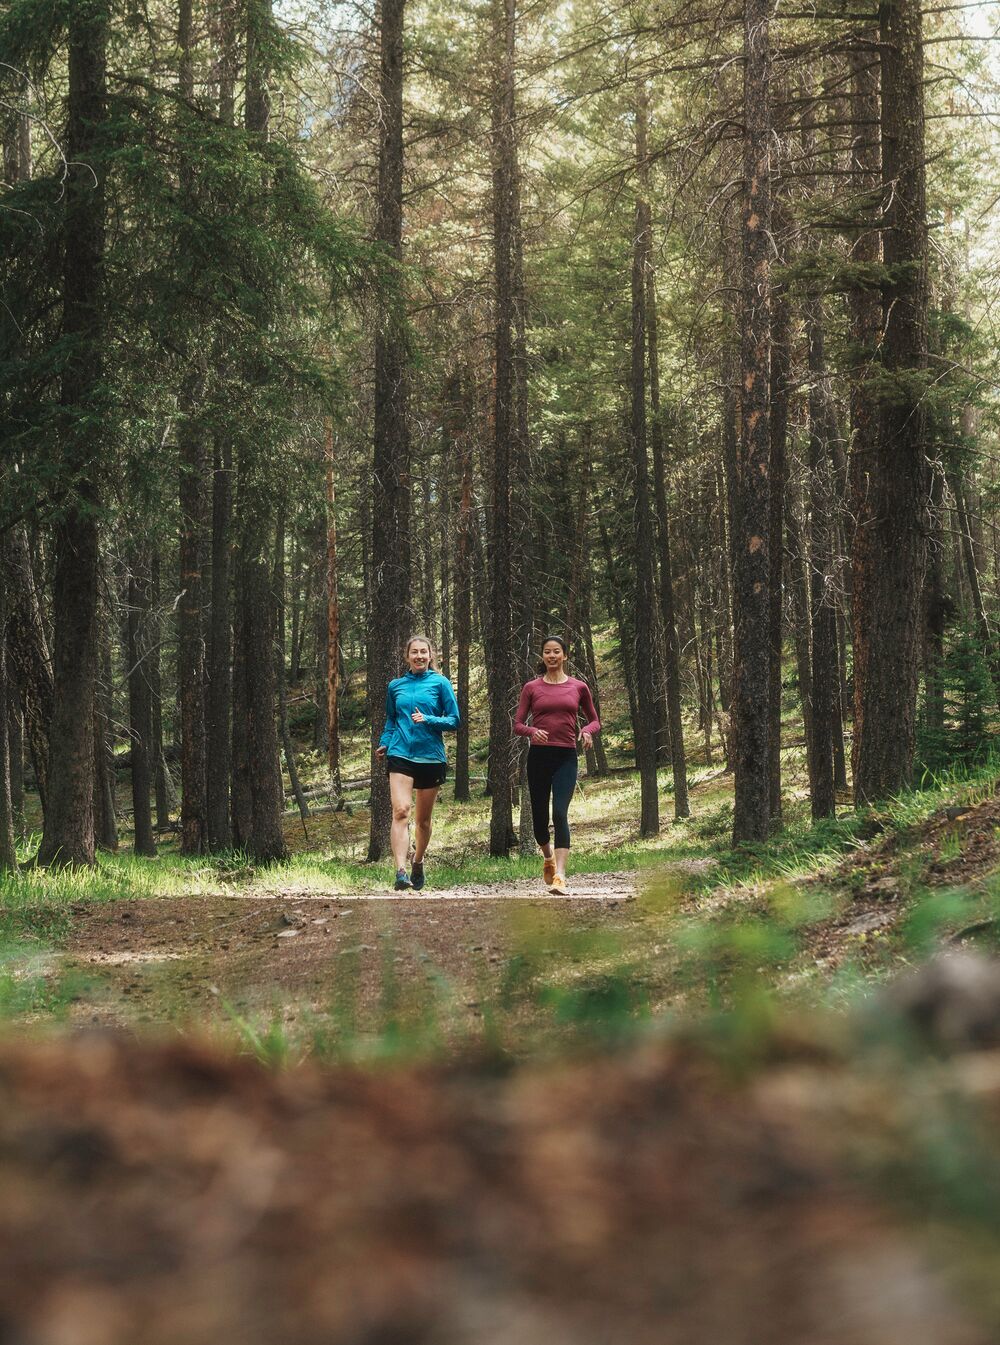 Two people trail running through a forest in Banff National Park.